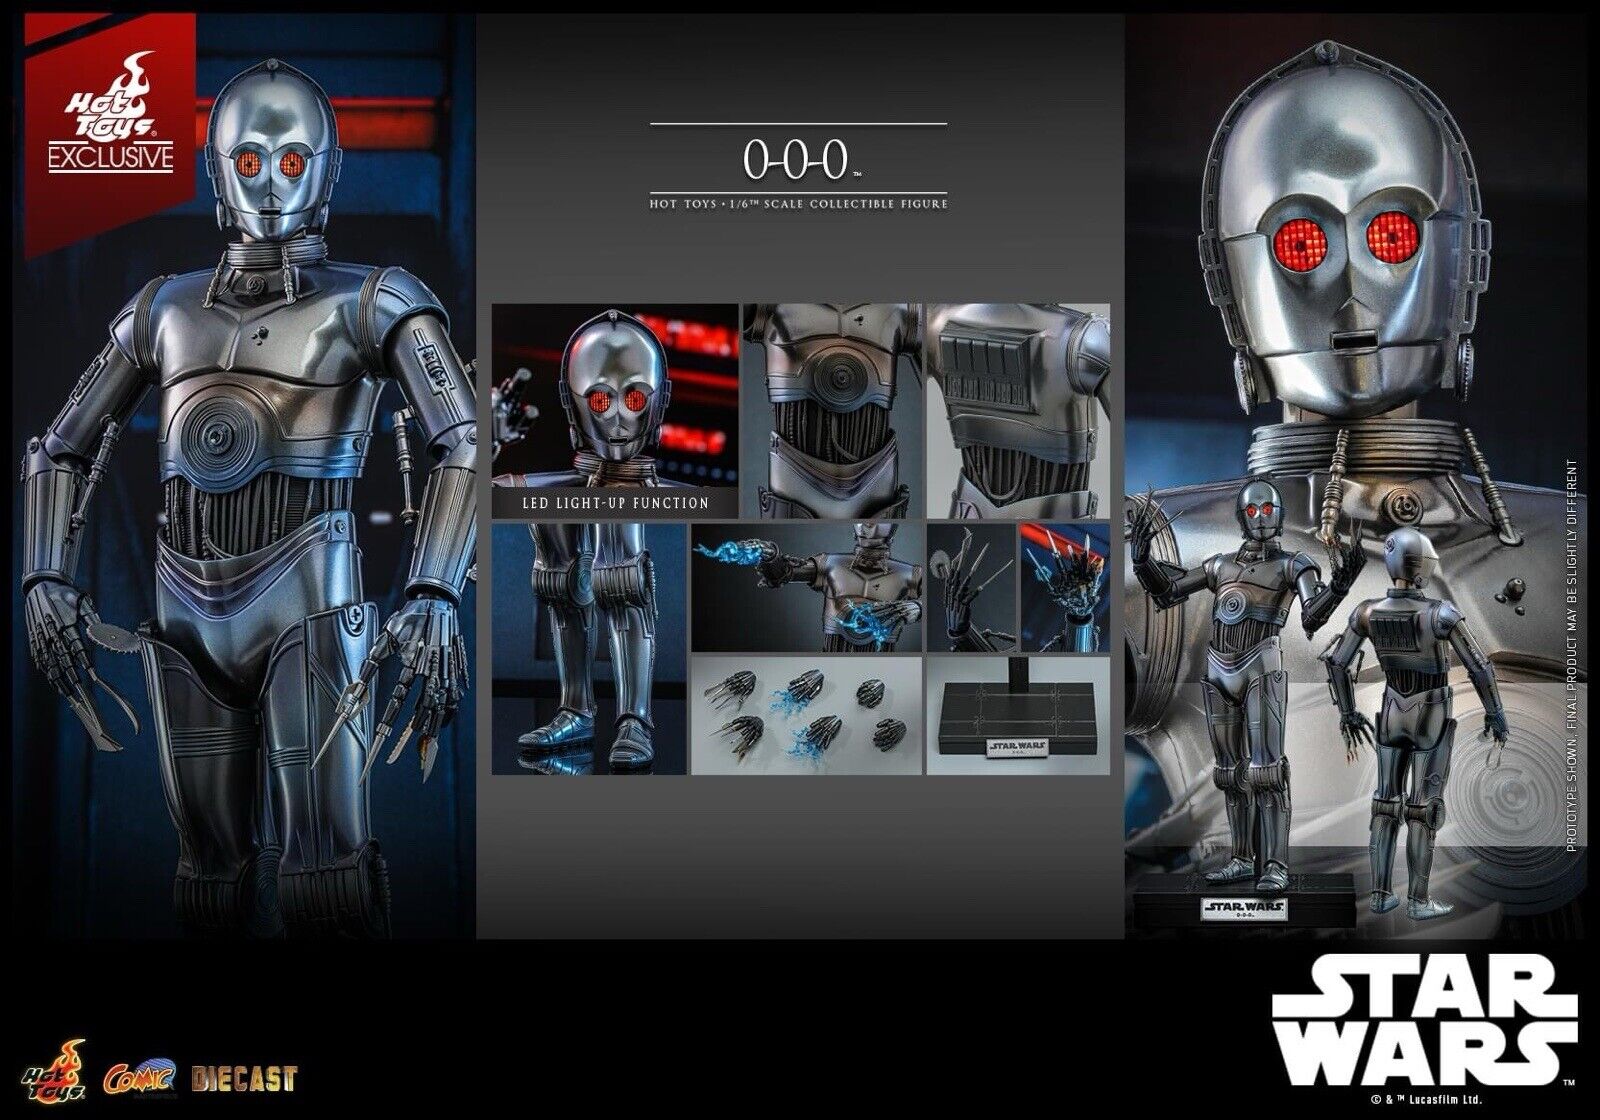 0-0-0™ Sixth Scale Figure by Hot Toys PRESALE